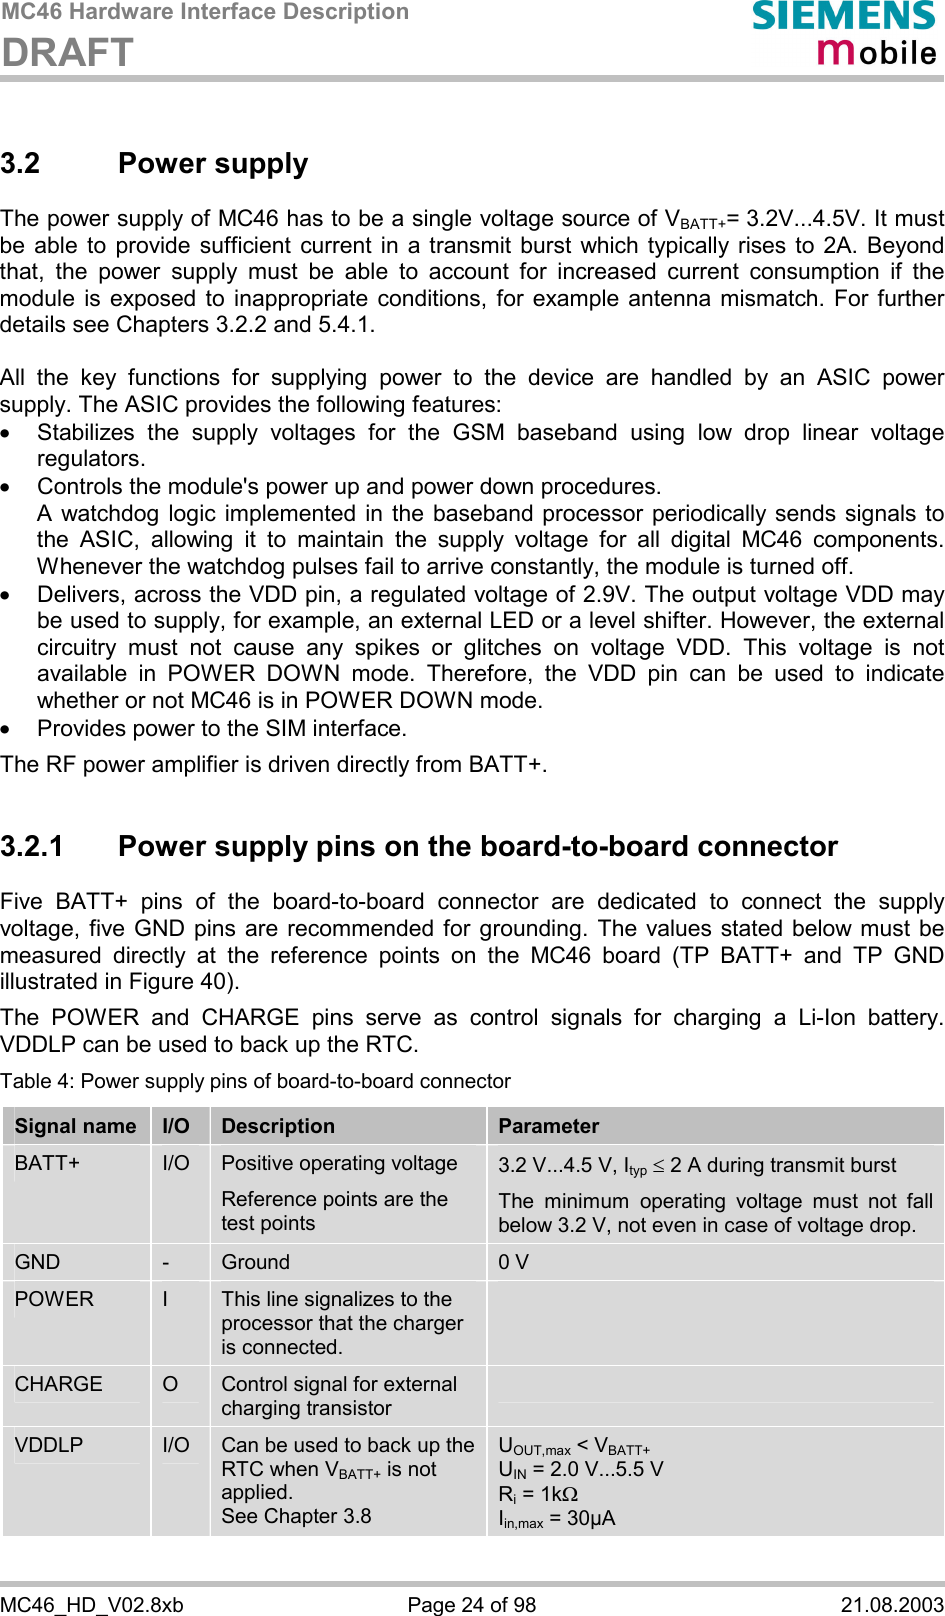 MC46 Hardware Interface Description DRAFT      MC46_HD_V02.8xb  Page 24 of 98  21.08.2003 3.2 Power supply The power supply of MC46 has to be a single voltage source of VBATT+= 3.2V...4.5V. It must be able to provide sufficient current in a transmit burst which typically rises to 2A. Beyond that, the power supply must be able to account for increased current consumption if the module is exposed to inappropriate conditions, for example antenna mismatch. For further details see Chapters 3.2.2 and 5.4.1.  All the key functions for supplying power to the device are handled by an ASIC power supply. The ASIC provides the following features: ·  Stabilizes the supply voltages for the GSM baseband using low drop linear voltage regulators.  ·  Controls the module&apos;s power up and power down procedures.  A watchdog logic implemented in the baseband processor periodically sends signals to the ASIC, allowing it to maintain the supply voltage for all digital MC46 components. Whenever the watchdog pulses fail to arrive constantly, the module is turned off.  ·  Delivers, across the VDD pin, a regulated voltage of 2.9V. The output voltage VDD may be used to supply, for example, an external LED or a level shifter. However, the external circuitry must not cause any spikes or glitches on voltage VDD. This voltage is not available in POWER DOWN mode. Therefore, the VDD pin can be used to indicate whether or not MC46 is in POWER DOWN mode. ·  Provides power to the SIM interface.  The RF power amplifier is driven directly from BATT+.  3.2.1  Power supply pins on the board-to-board connector Five BATT+ pins of the board-to-board connector are dedicated to connect the supply voltage, five GND pins are recommended for grounding. The values stated below must be measured directly at the reference points on the MC46 board (TP BATT+ and TP GND illustrated in Figure 40).  The POWER and CHARGE pins serve as control signals for charging a Li-Ion battery. VDDLP can be used to back up the RTC.  Table 4: Power supply pins of board-to-board connector Signal name  I/O  Description  Parameter BATT+  I/O  Positive operating voltage Reference points are the test points  3.2 V...4.5 V, Ityp £ 2 A during transmit burst The minimum operating voltage must not fall below 3.2 V, not even in case of voltage drop. GND  -  Ground  0 V POWER  I  This line signalizes to the processor that the charger is connected.  CHARGE  O  Control signal for external charging transistor  VDDLP  I/O  Can be used to back up the RTC when VBATT+ is not applied.  See Chapter 3.8 UOUT,max &lt; VBATT+ UIN = 2.0 V...5.5 V Ri = 1kW Iin,max = 30µA  